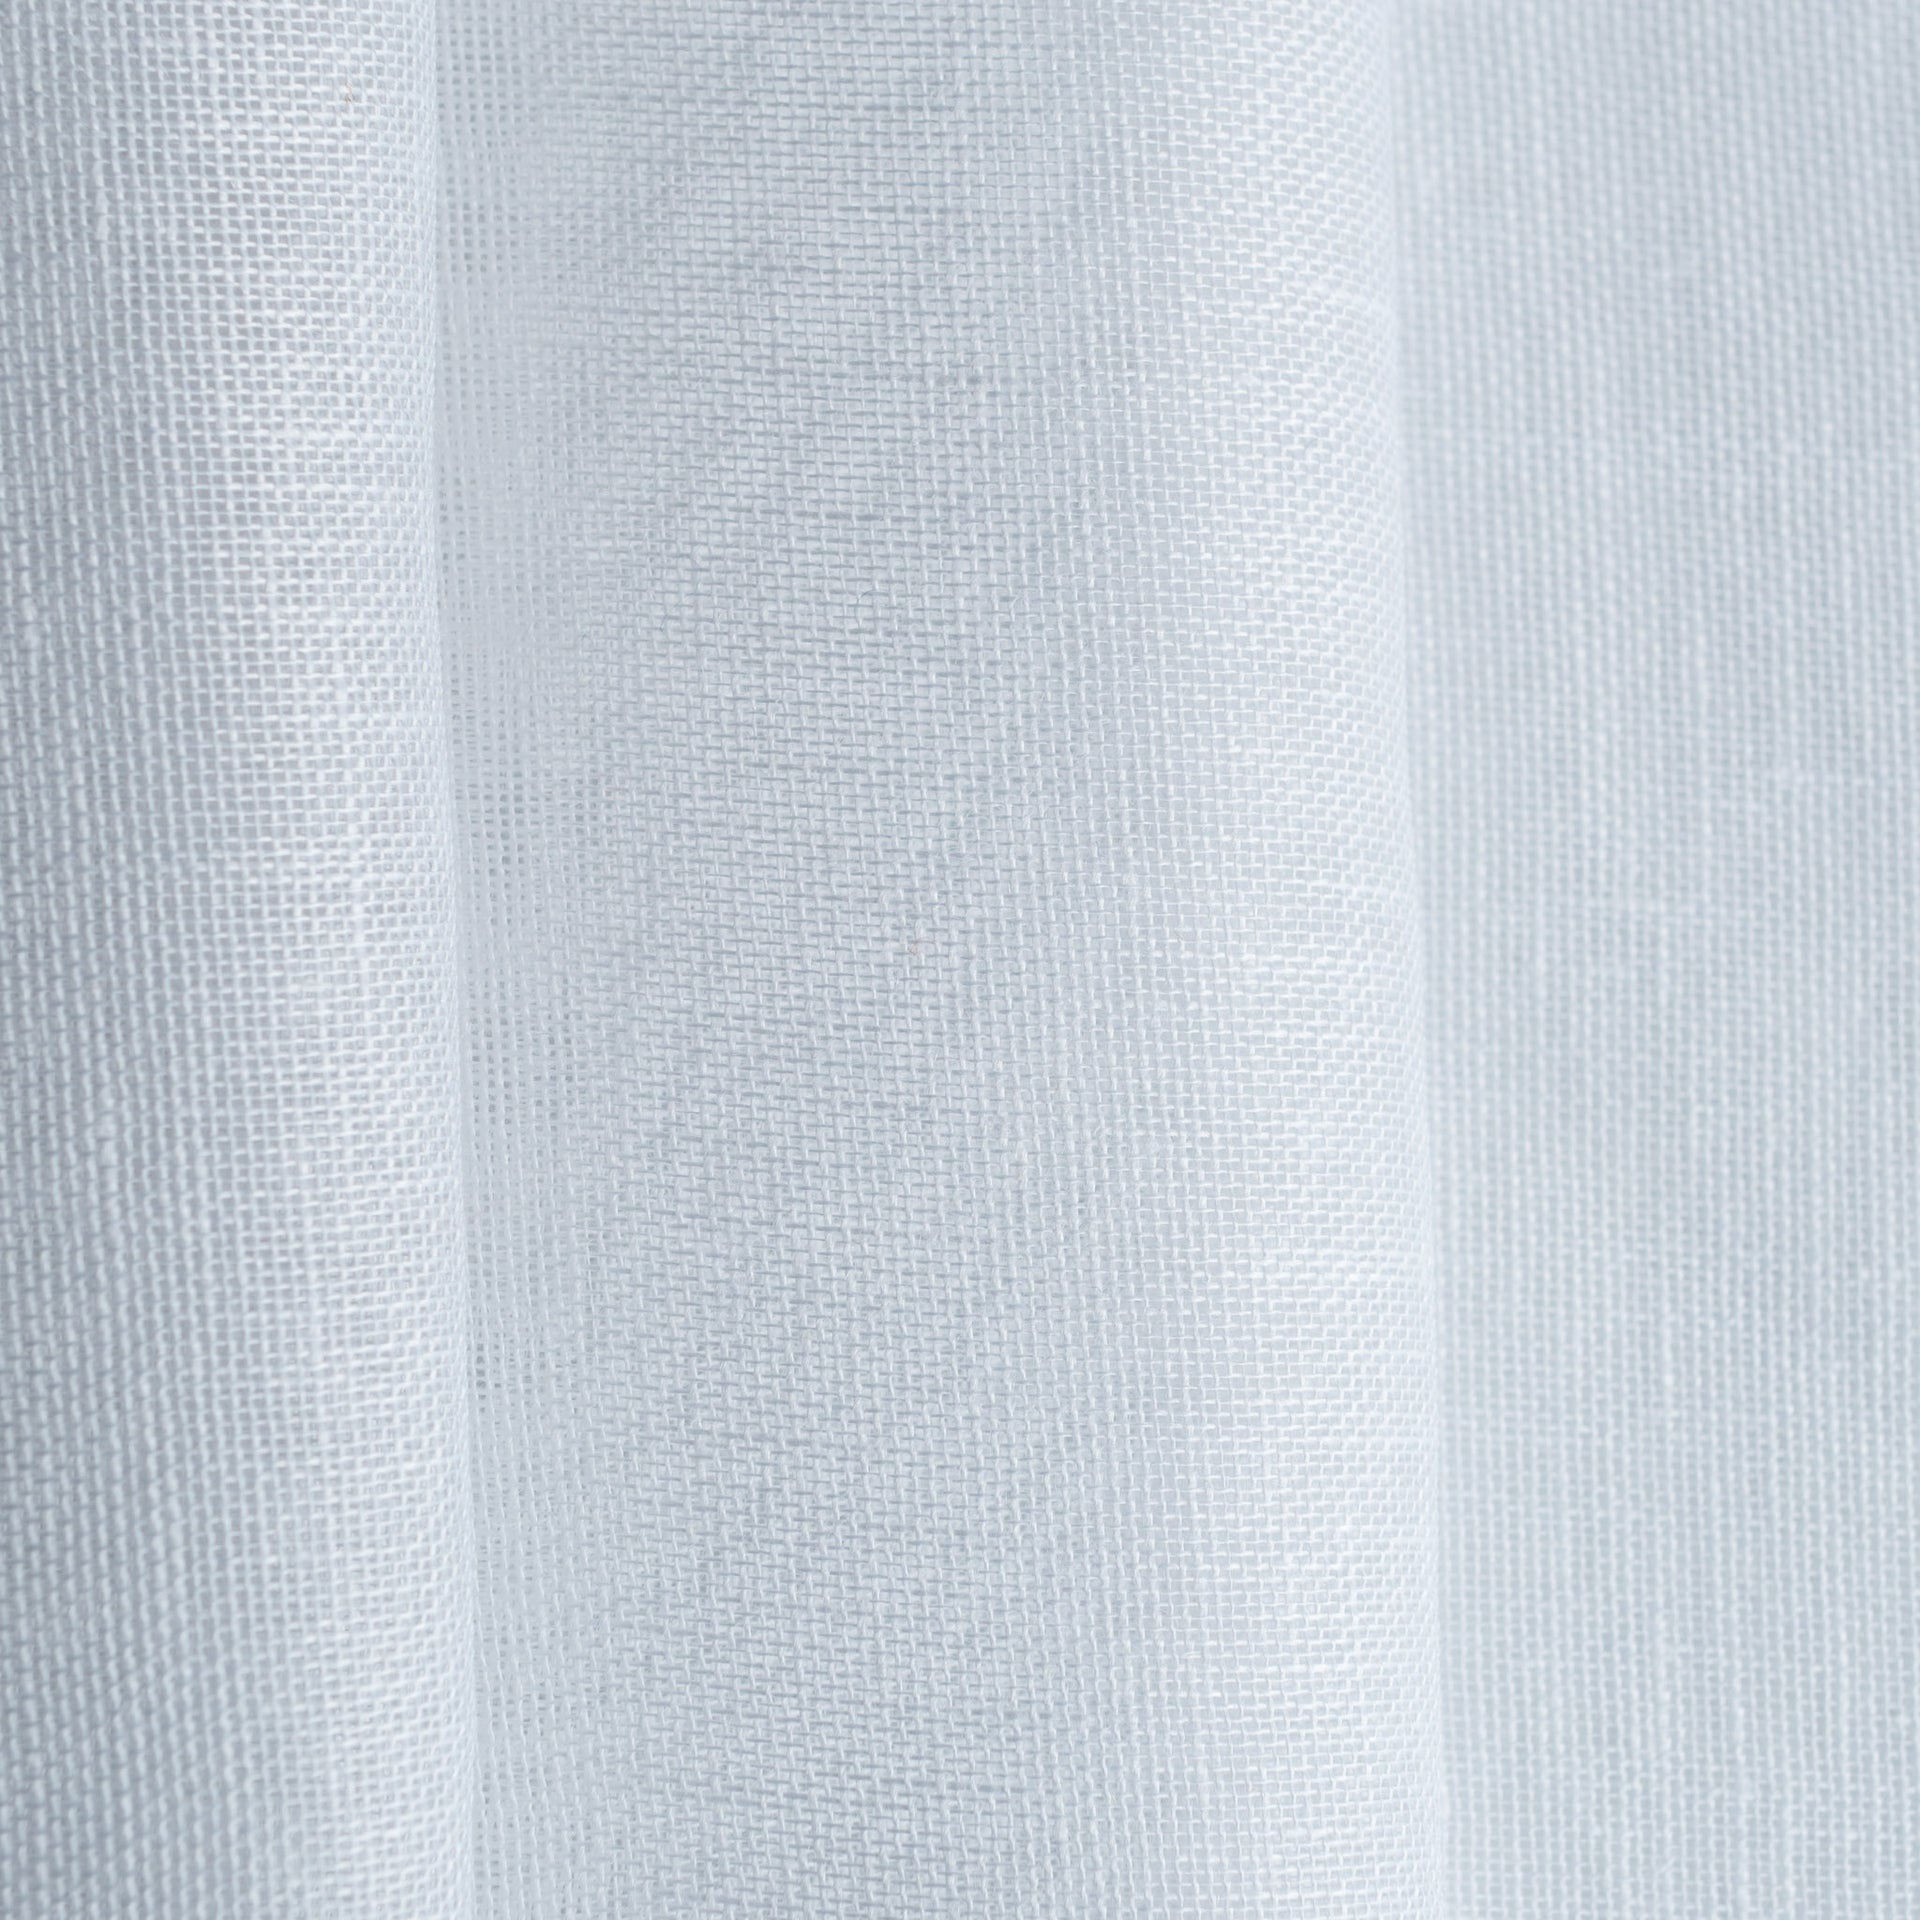 White Linen Sheer Fabric by the Yard - 100% French Natural - Width 52”- 106”